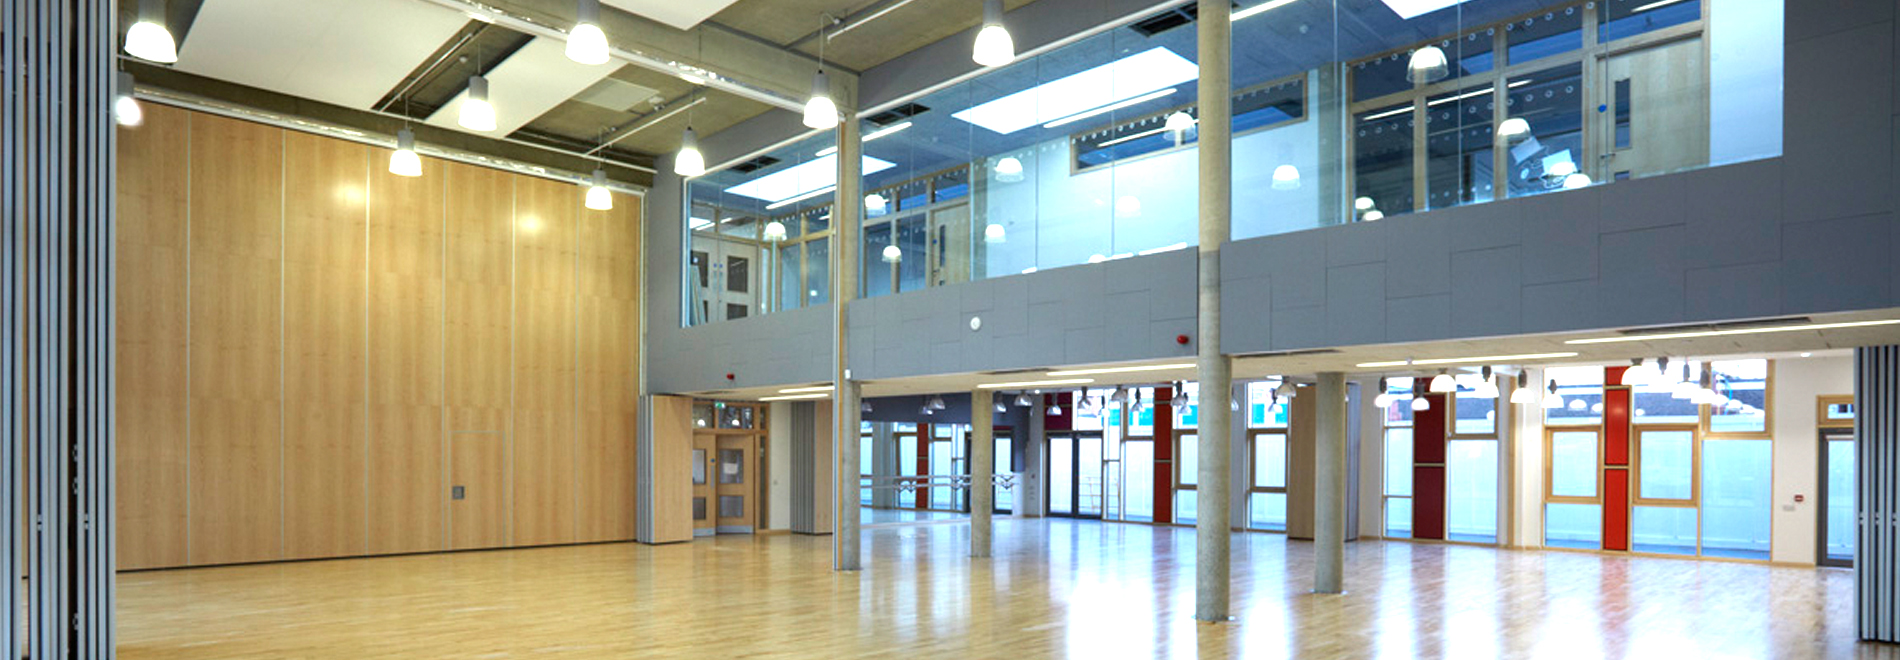 Broadwater Farm Inclusive Learning Campus 